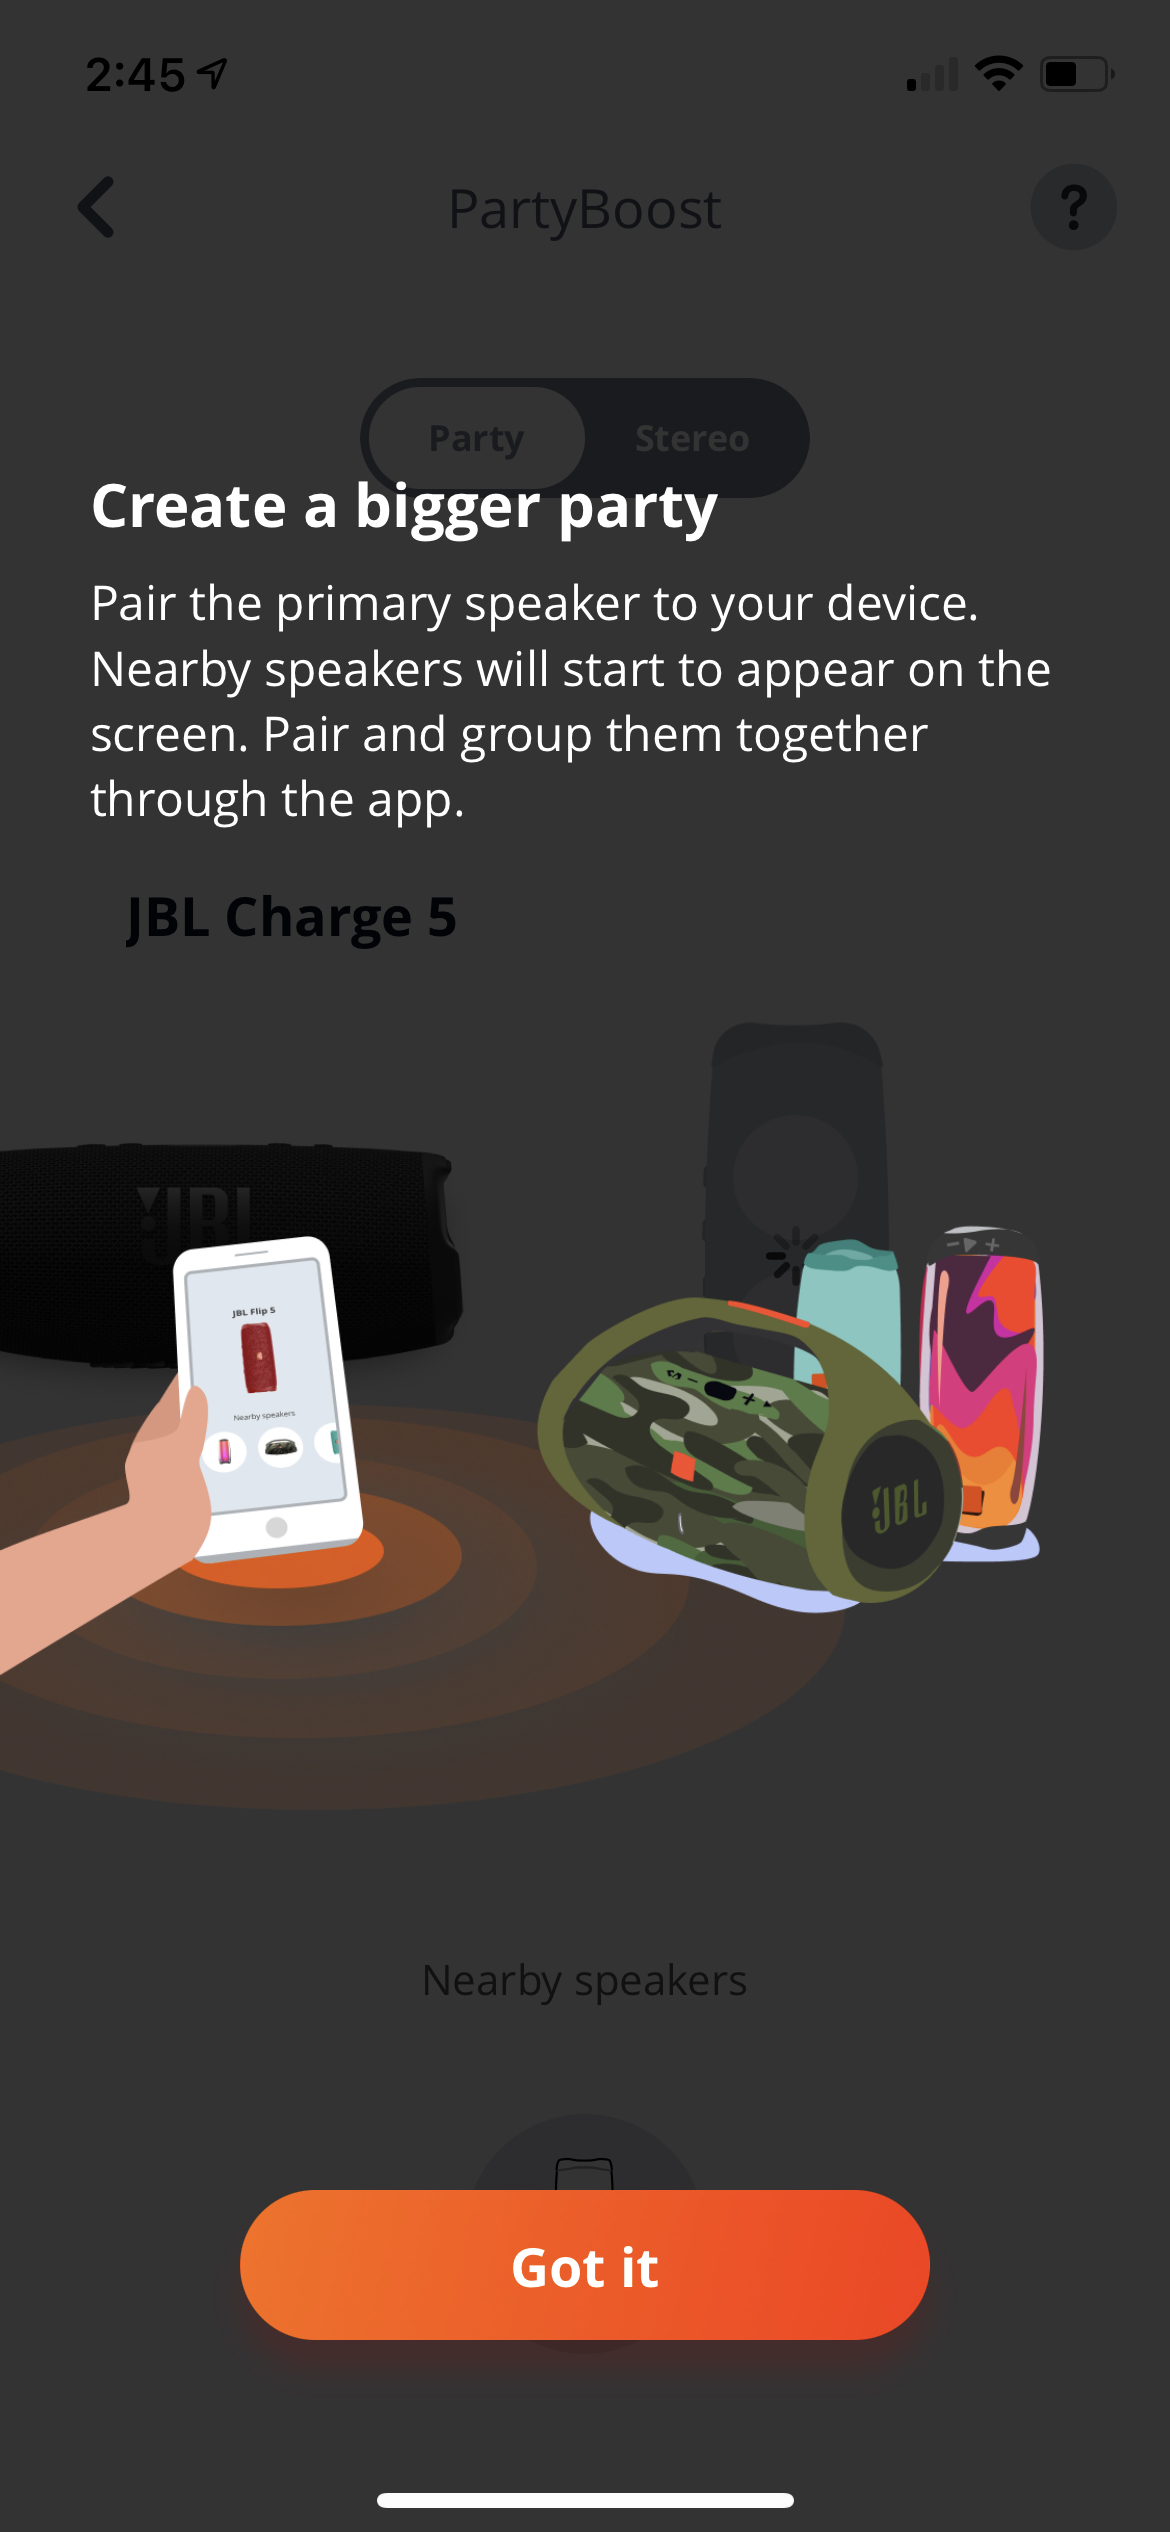 Www.jbl.com › support-productJBL Support - Product - Official JBL Store - Speakers ...